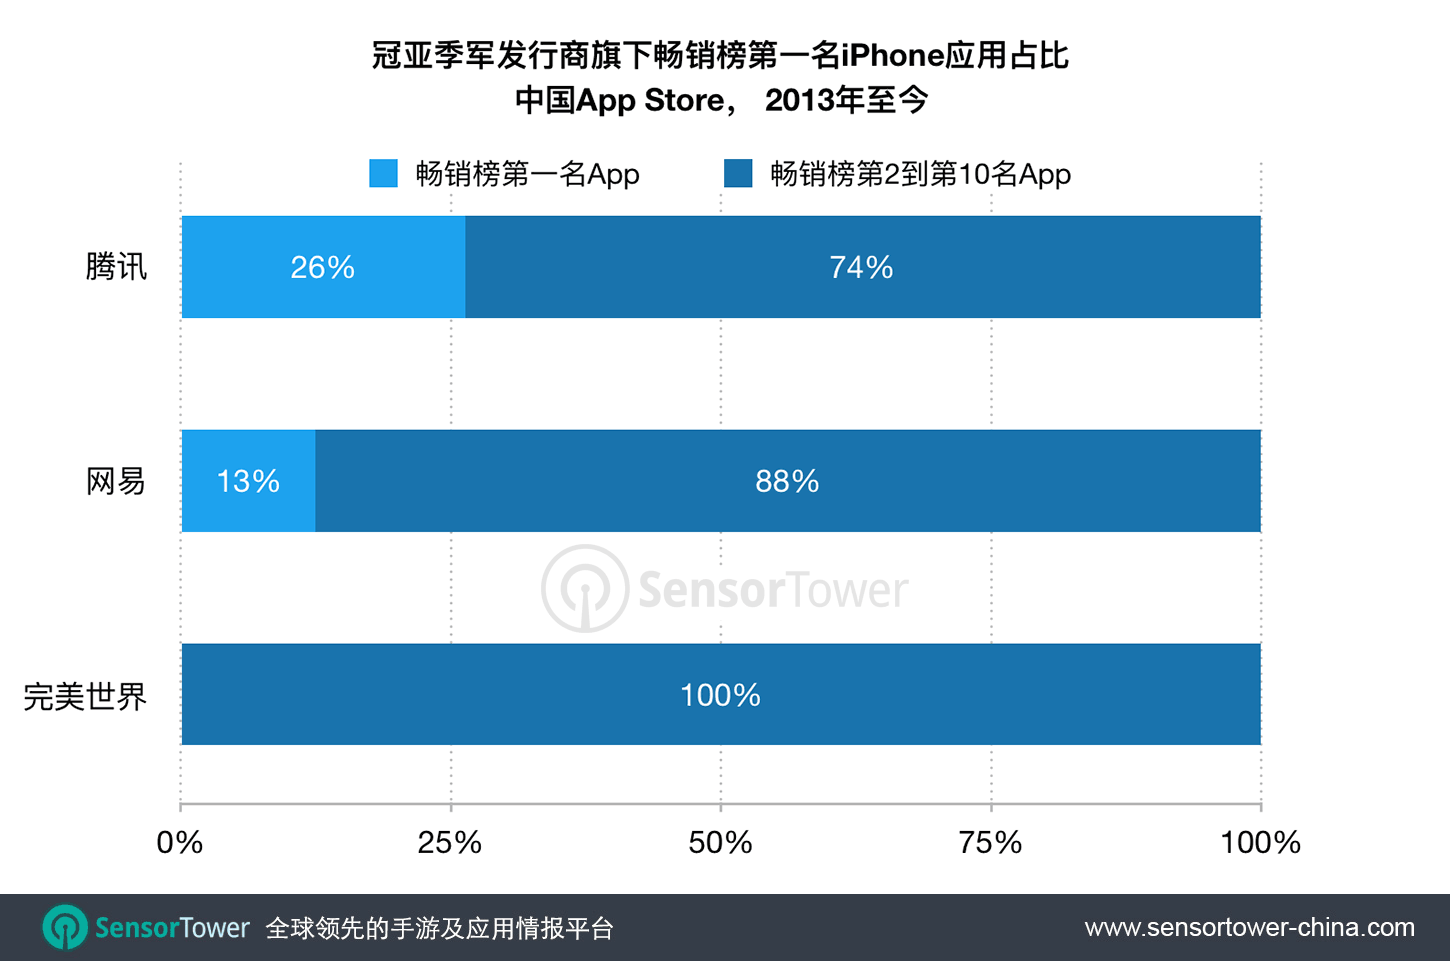 Percentage of No. 1 Grossing iPhone Apps on CN App Store for Top Three Publishers